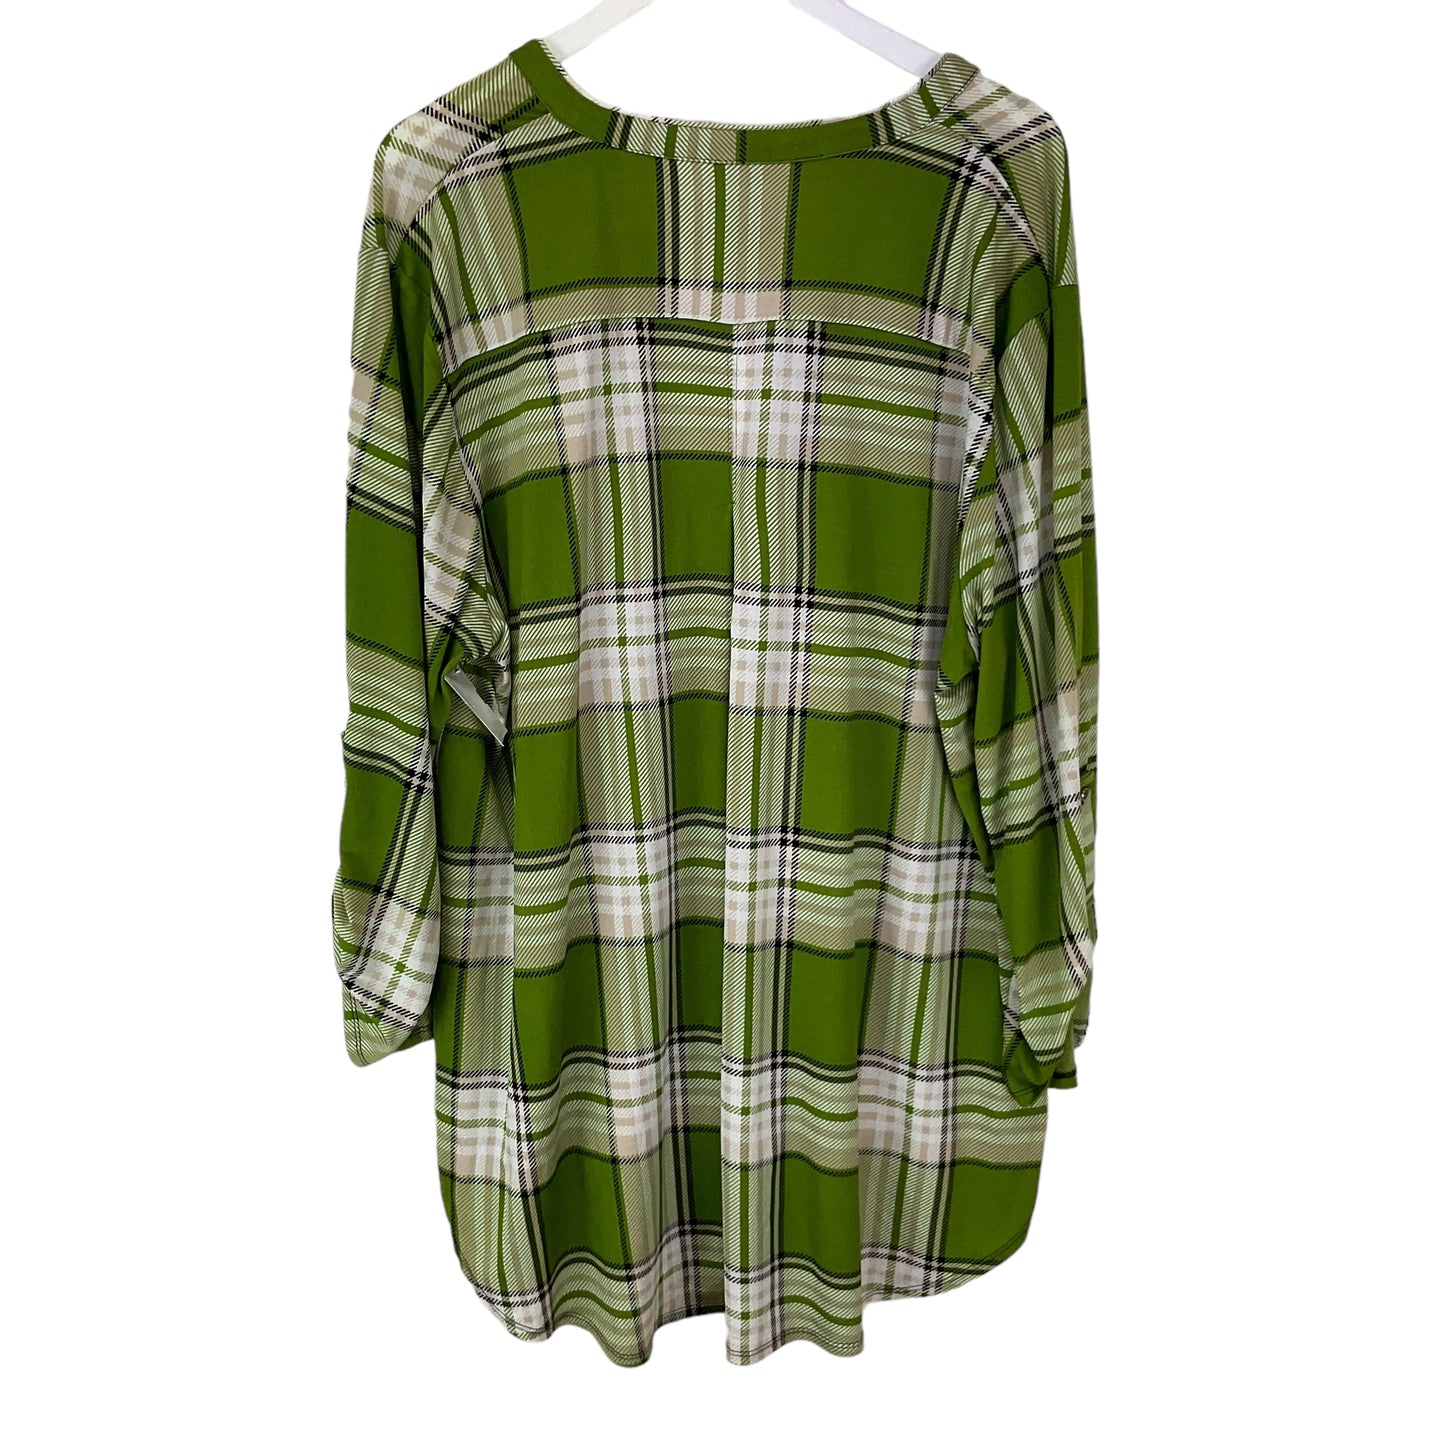 Green Top Long Sleeve Cato, Size 3x